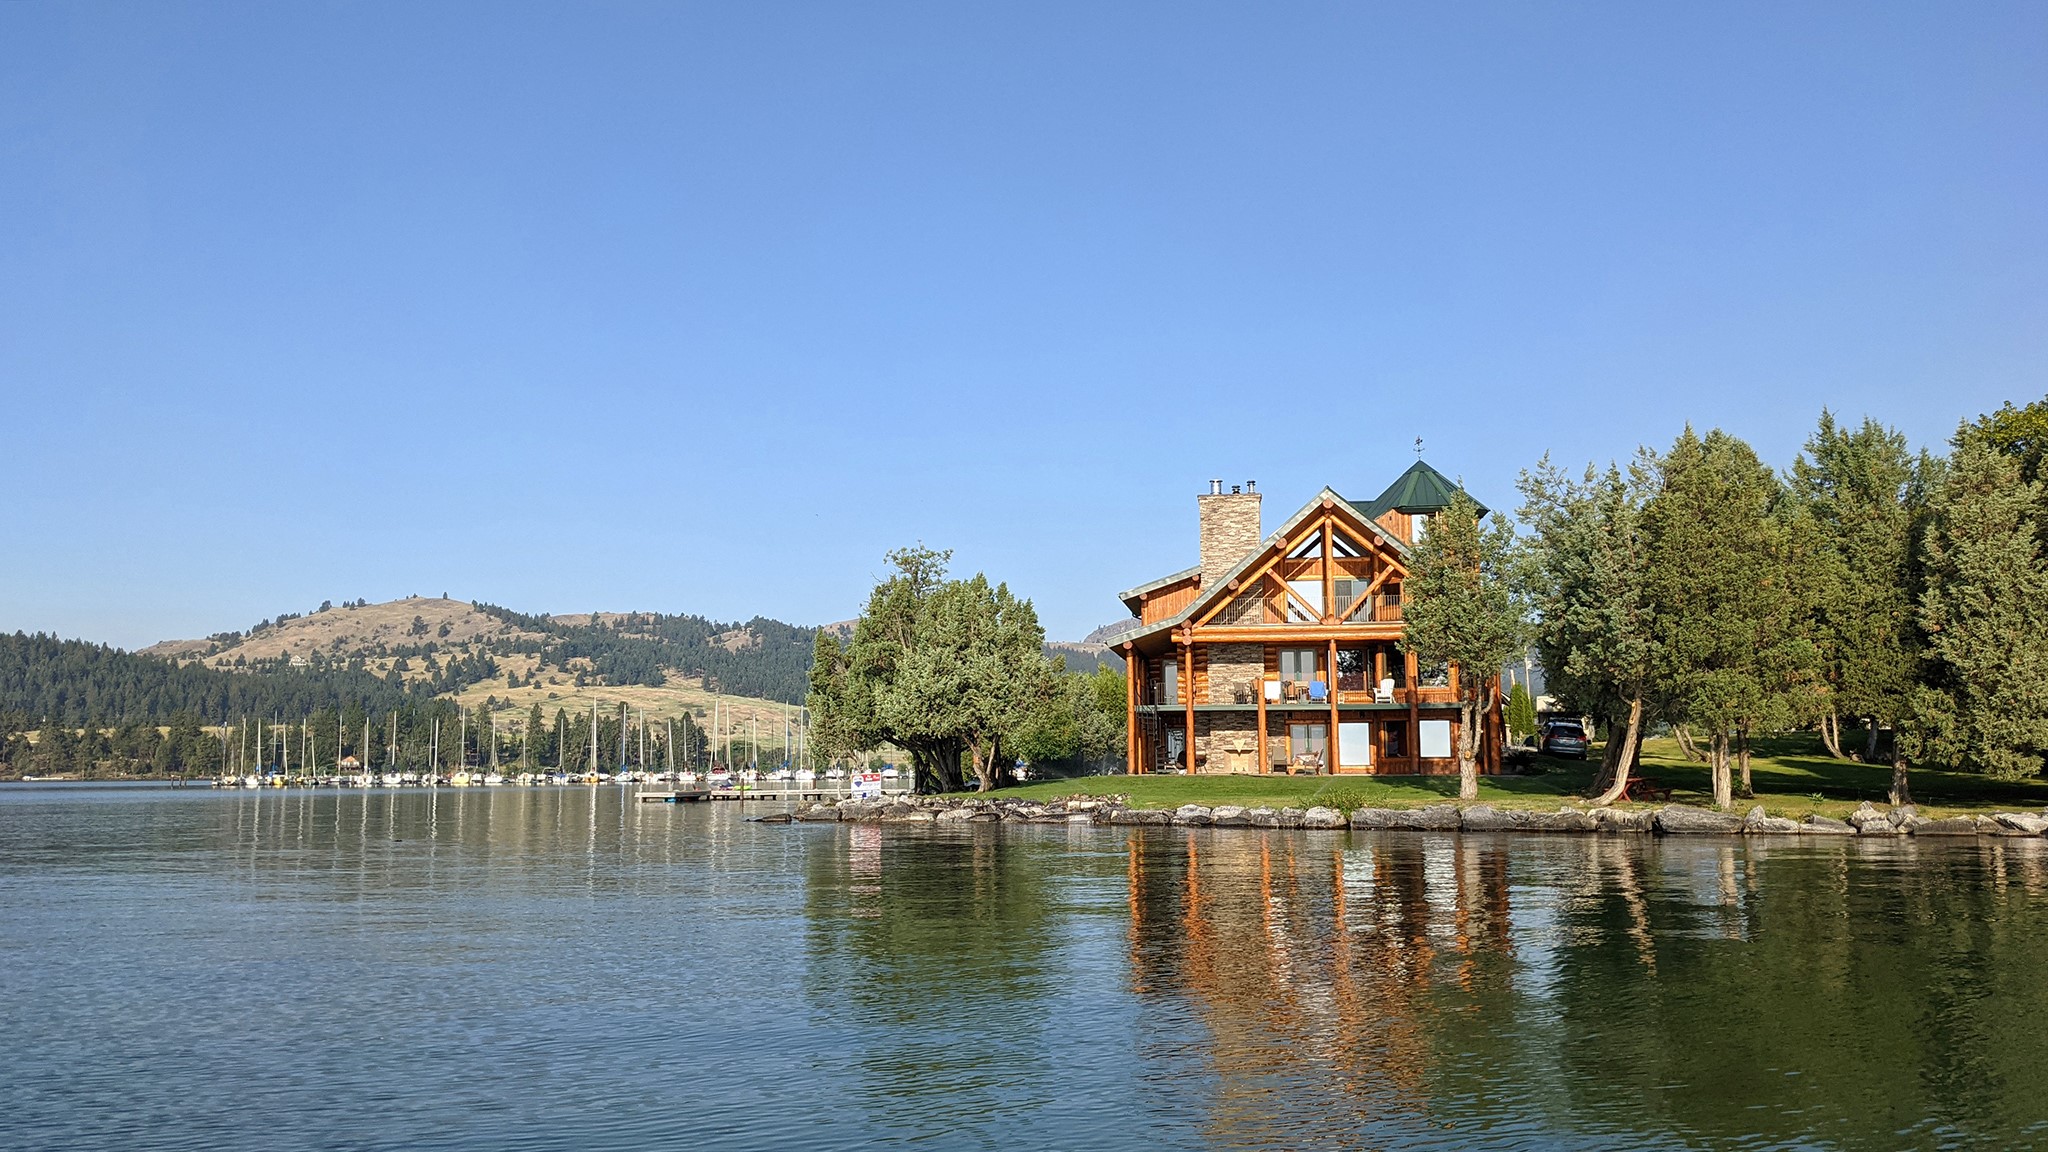 Absolutely lovely log home set at waters edge with Flathead Lake 202 ft frontage facing east and south mid point on the westshore in Dayton. Spacious main floor living with huge windows light up the Great Room with stone fireplace, gourmet Kitchen & Dining. Big wrap deck area makes for a great spot to take in the lake views with many sailboats in the area. The Primary Bedroom suite adjoins an enclosed Hot Tub room overlooking the south frontage and dock. Full lower level enjoys Family Room with 2 seating areas, game area and alcove, lovely guest bedroom and bath; Walk out to patio and to grassy lawn.  Upstairs is loft library space, two more bedrooms and full bath. The darling caretaker or guest apartment is across the west patio and adjacent to double Garage. East and South views of the Mission Range & Wild Horse Island.  Call Scott Hollinger at 406-253-7268 or your real estate professional.